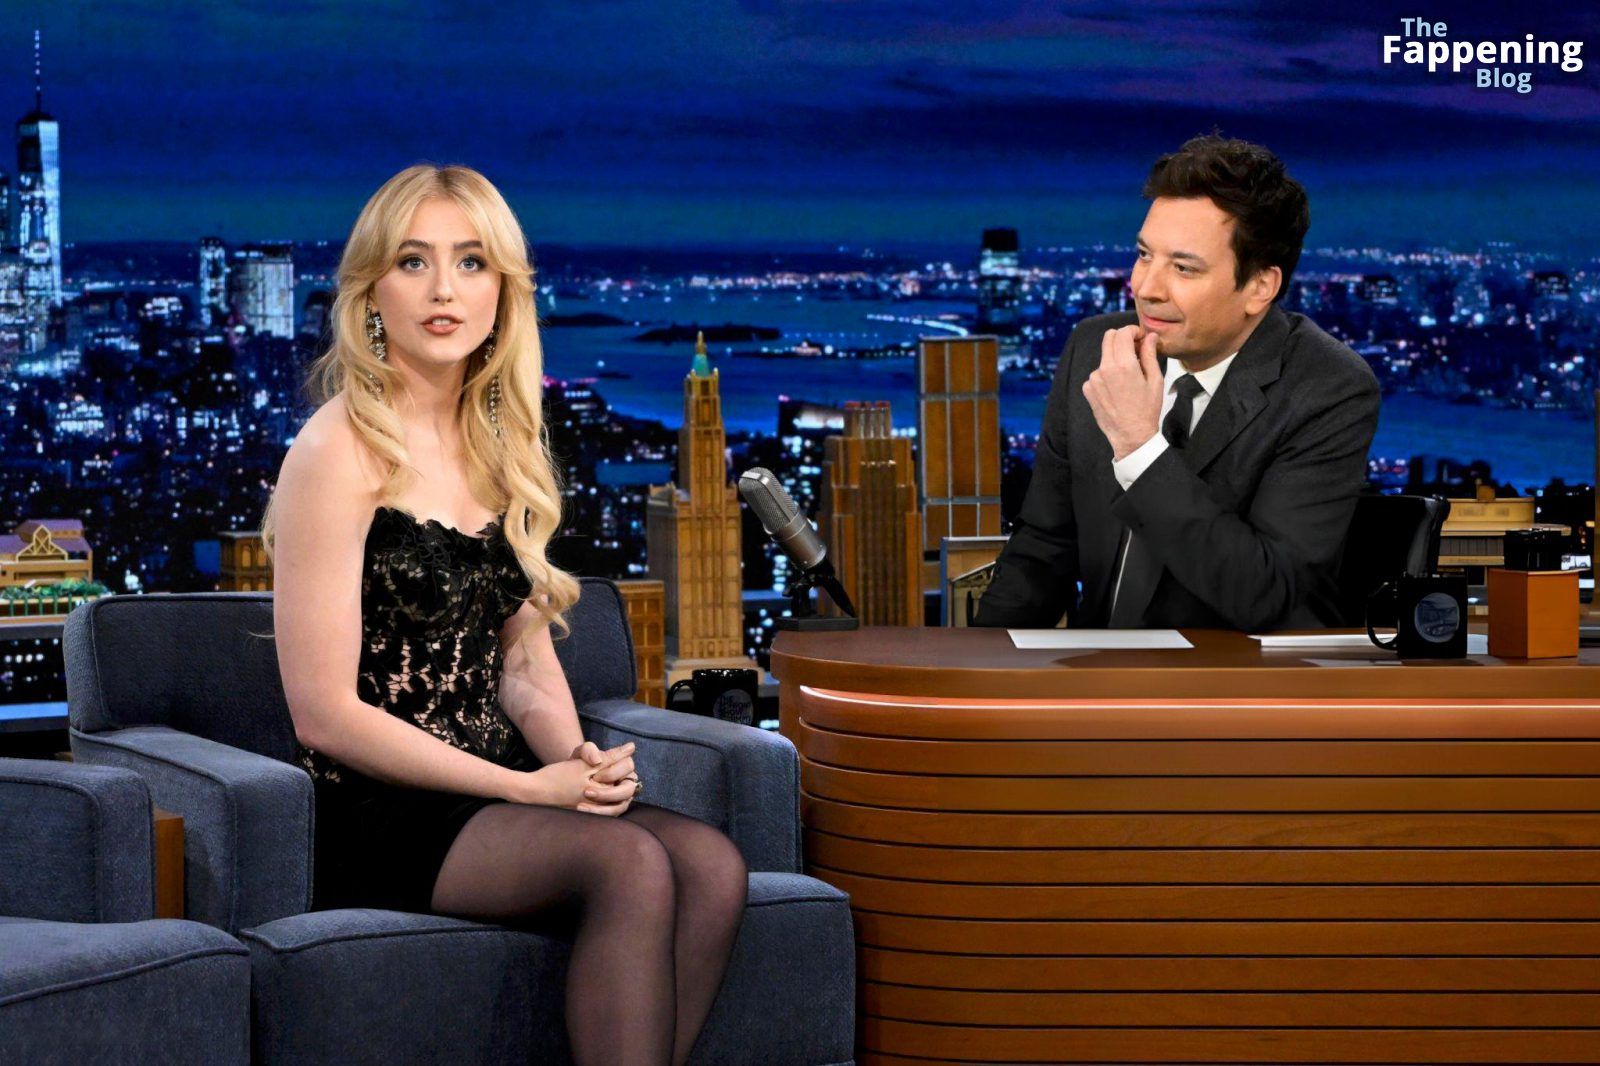 Kathryn Newton Shows Off Her Slender Legs on “The Tonight Show” (15 Photos)